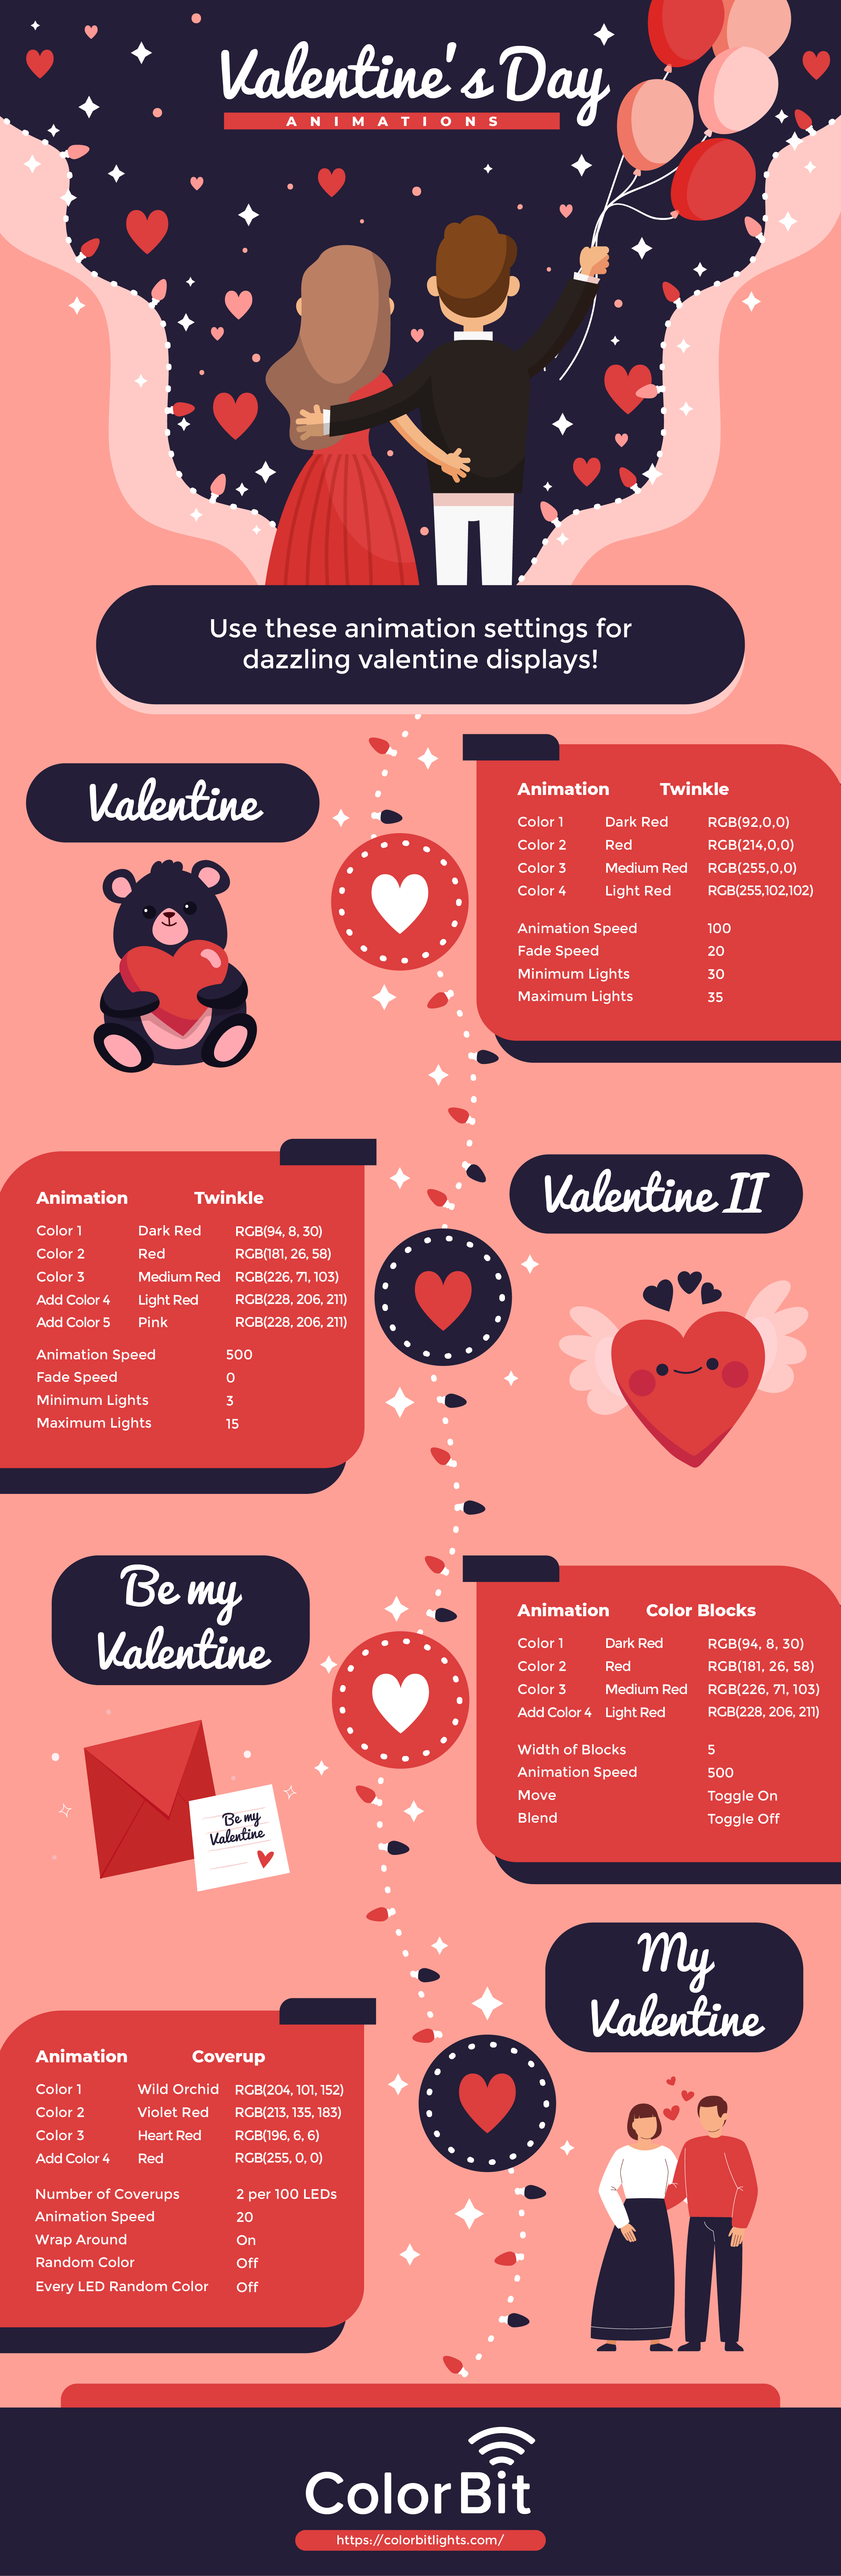 Valentine's Day Animations Infographic